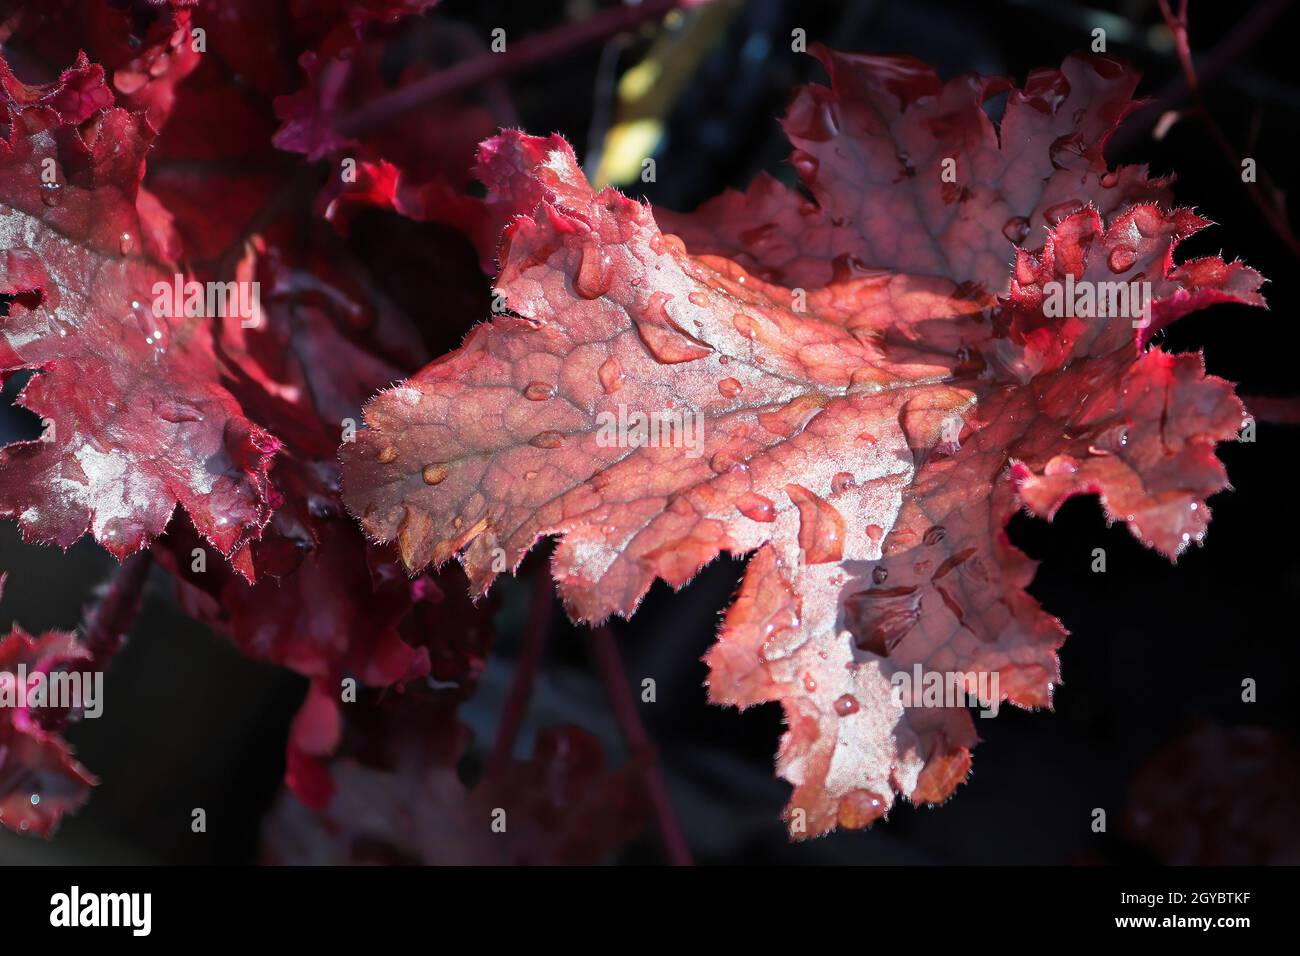 Closeup of the burgandy leaves on a coral bell plant. Stock Photo